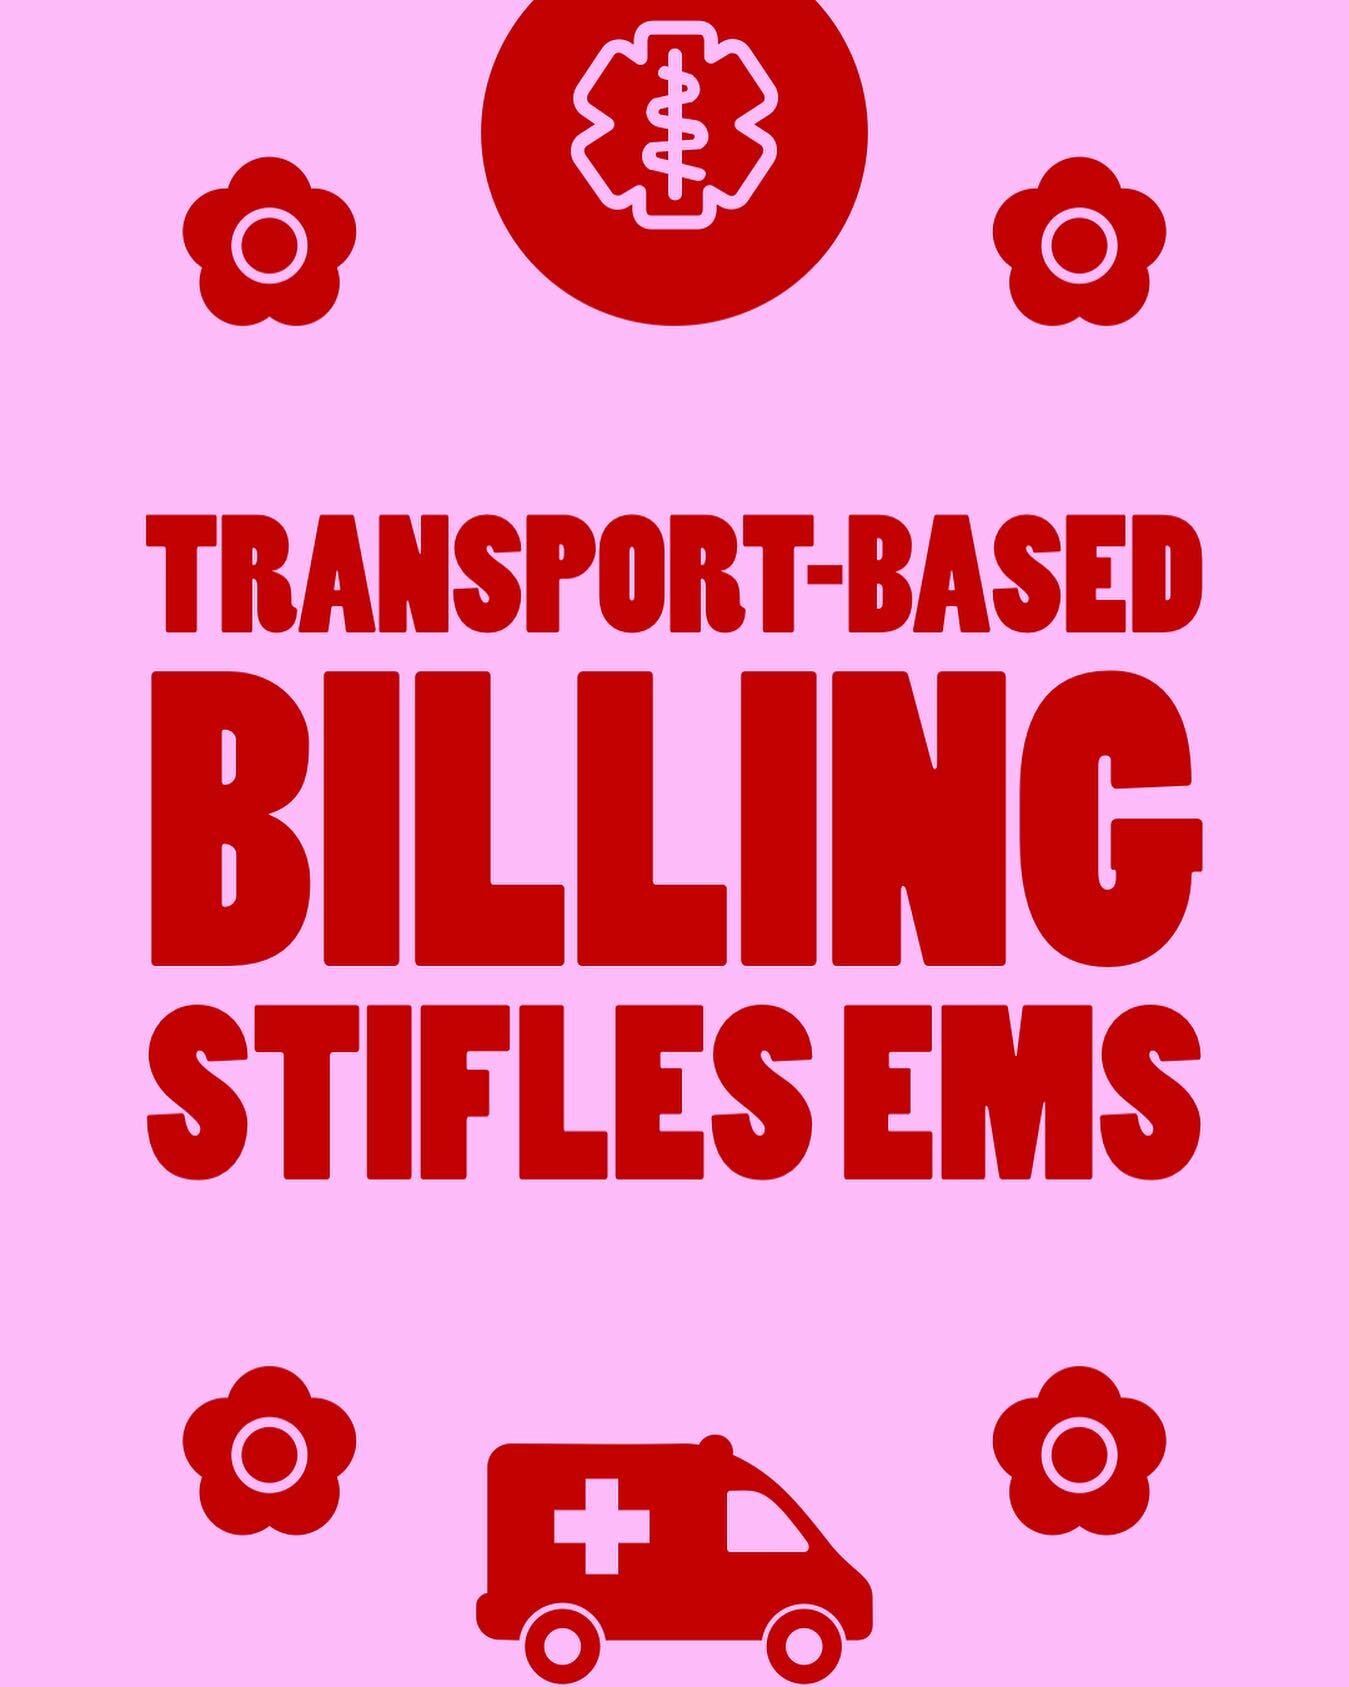 🚑TRANSPORT-BASED BILLING STIFLES EMS🚑

Medicare, the current largest insurance payer in the United States, has long operated ambulance billing on a per-transport basis only. Rather than billing for the exact nature of the call or services rendered,